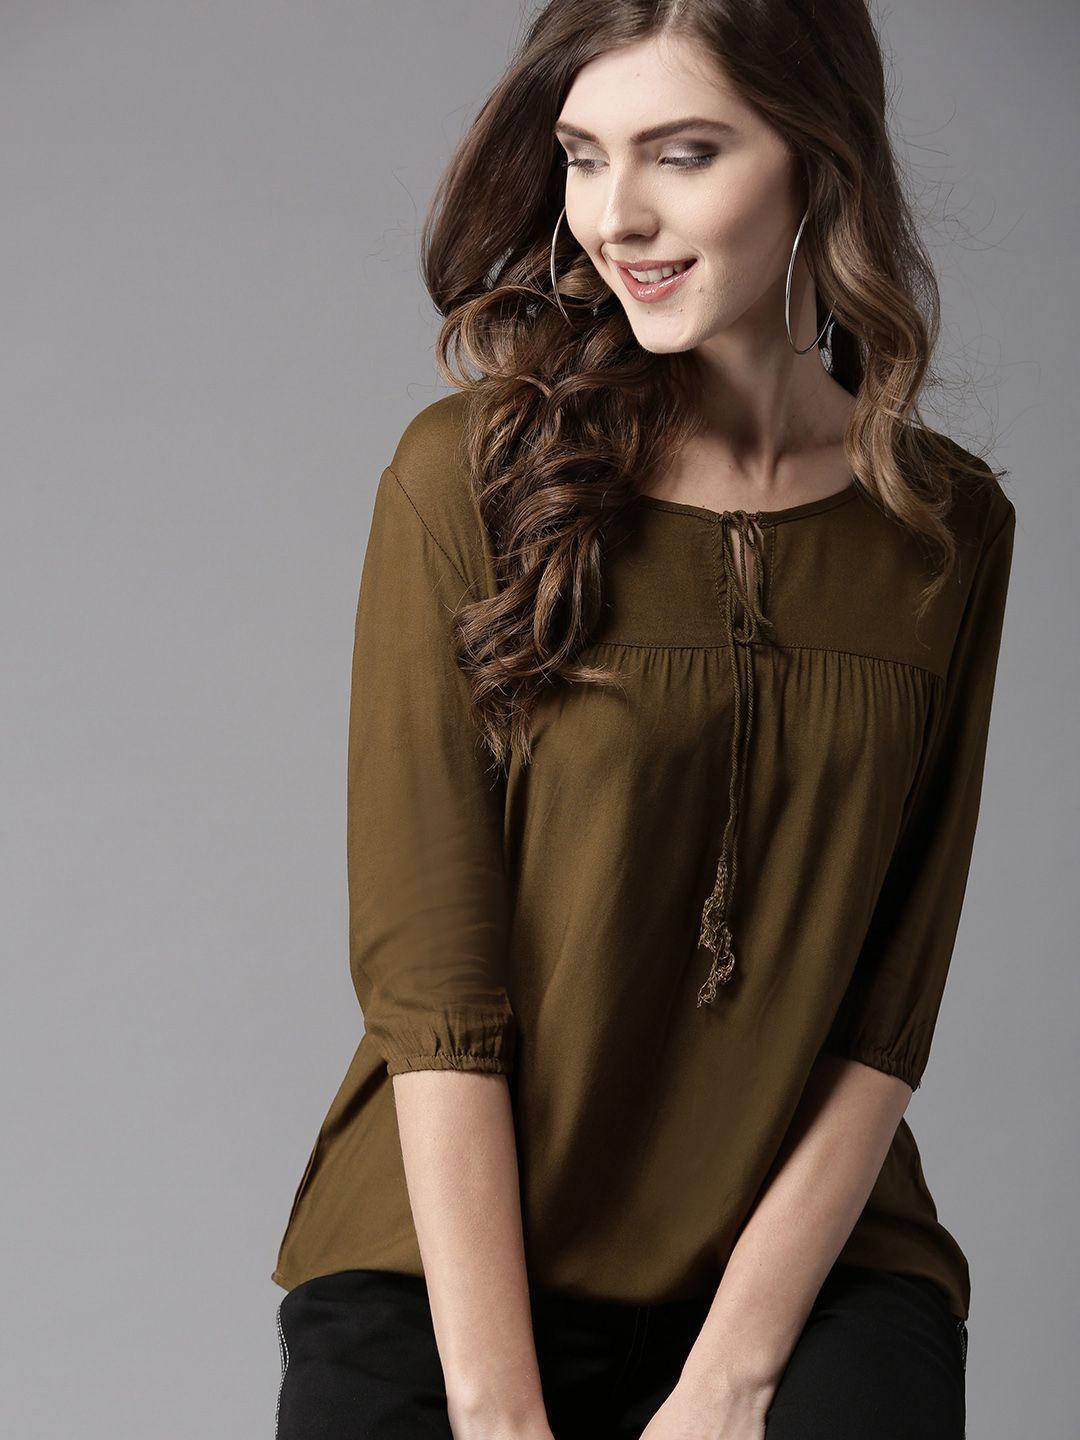 here&now women olive green solid top